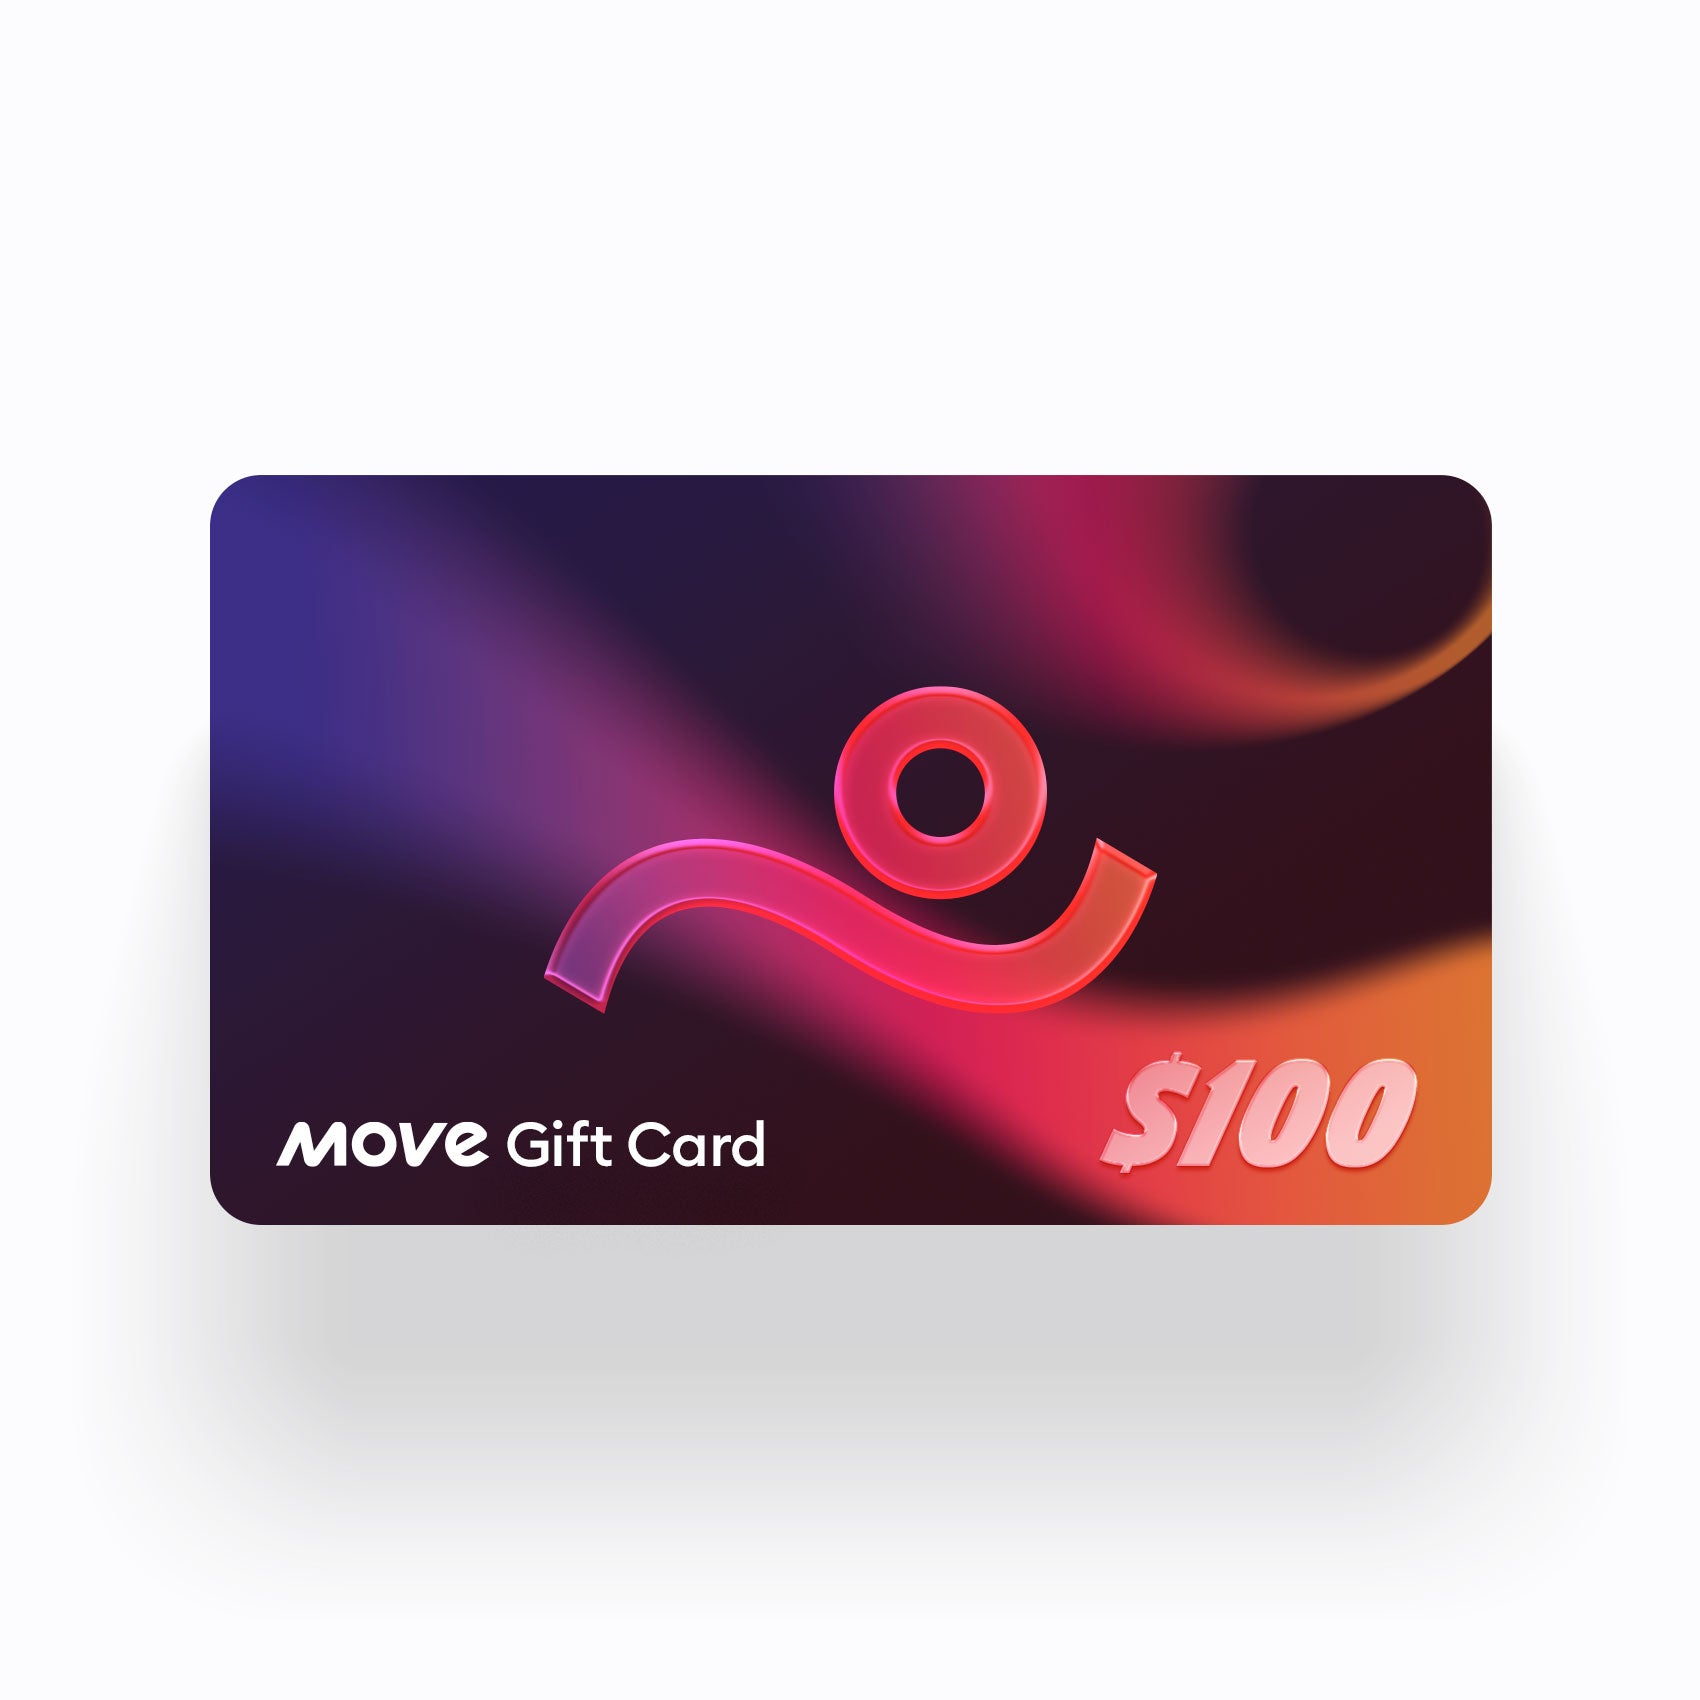 Move Gift Card